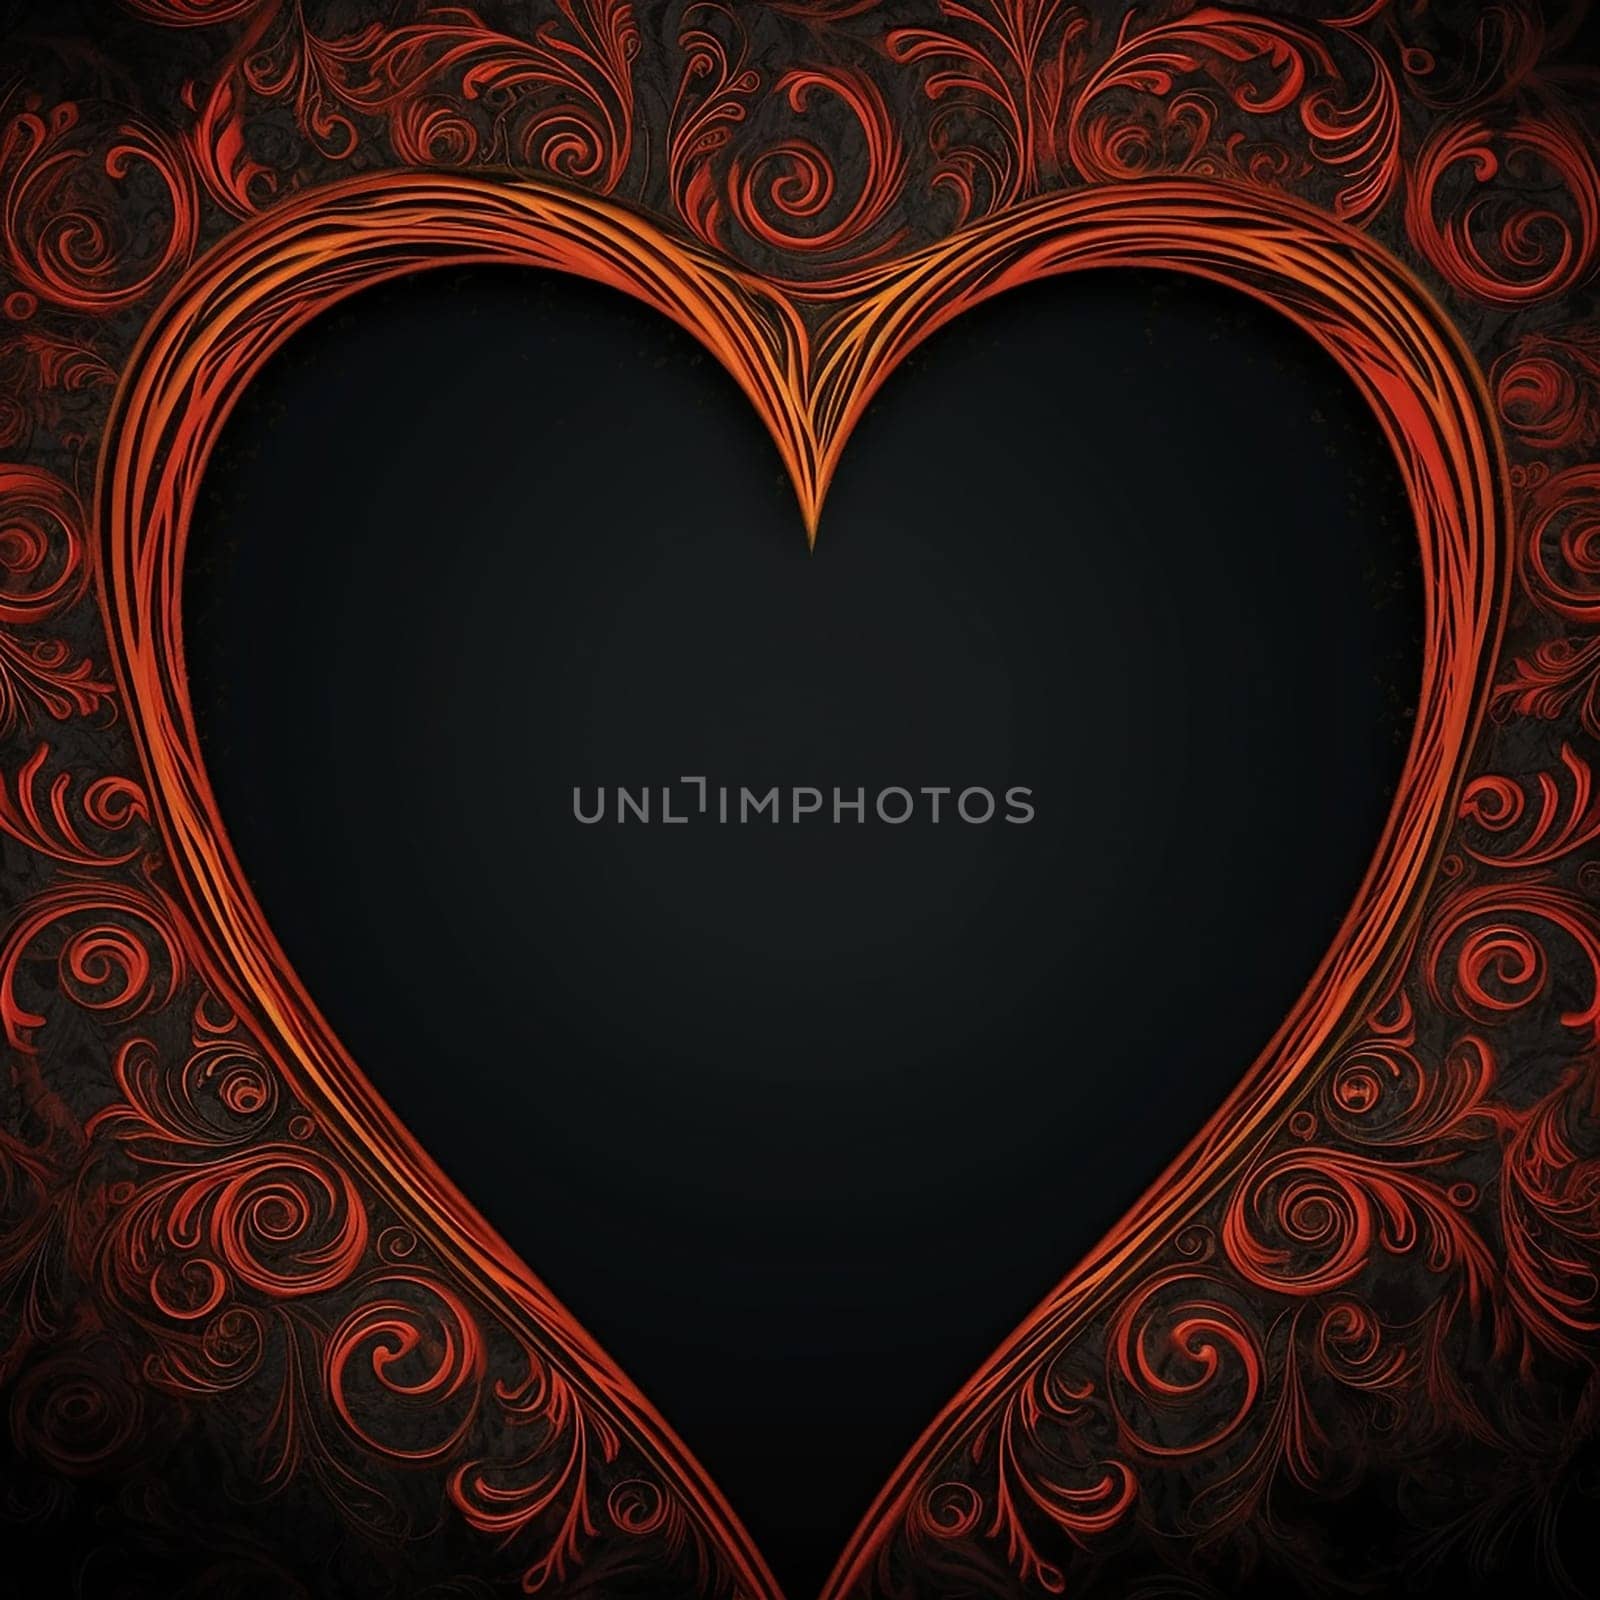 Ornate heart-shaped design on a dark background. by Hype2art